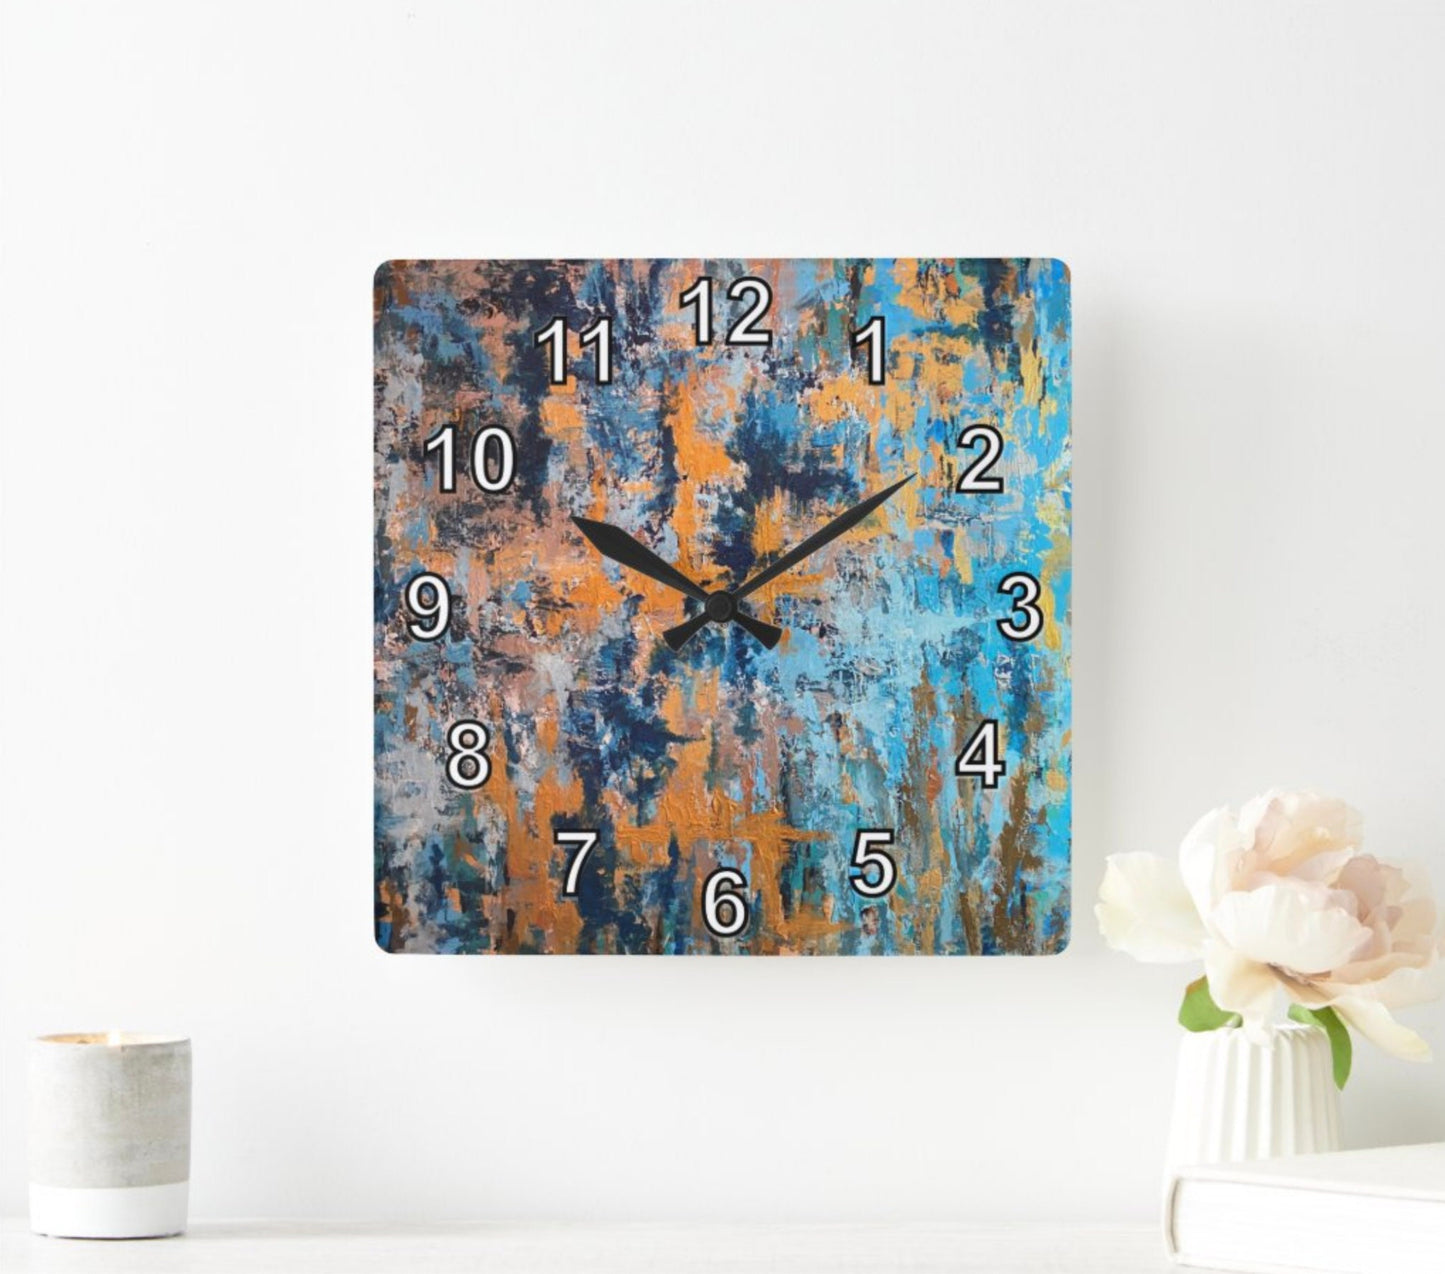 Abstract Expressionist Art Wall Clock by ArtClocks "Metal" Blankenship New Decor Gift